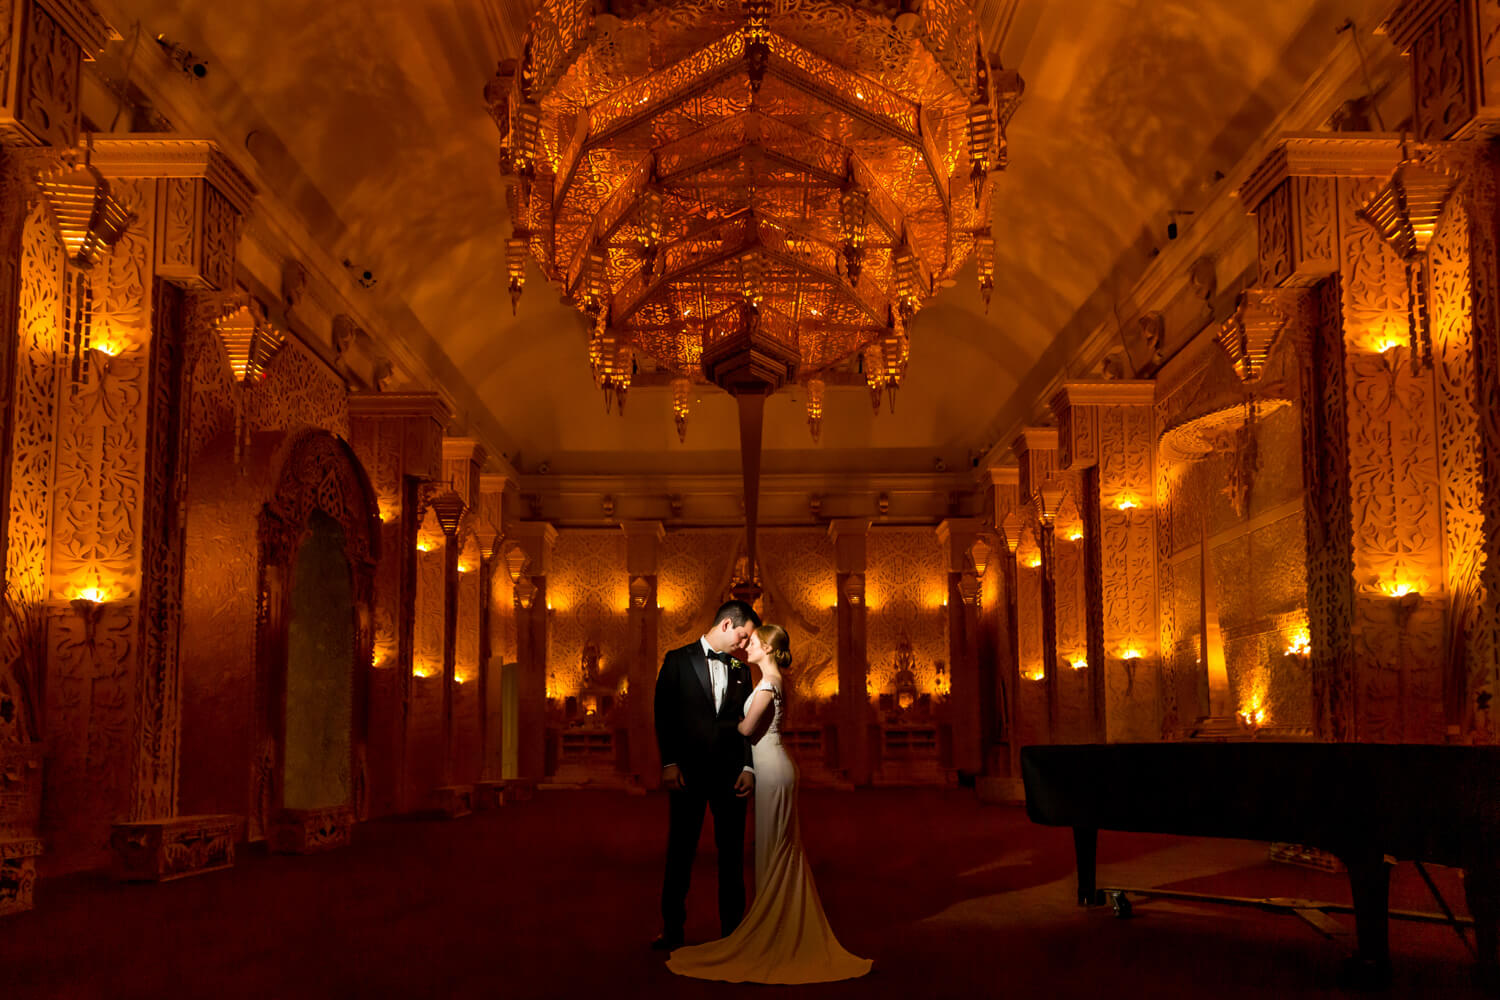 portrait of couple in a wood temple with gold lighting in the renwick gallery of art museum in DC david best burning man